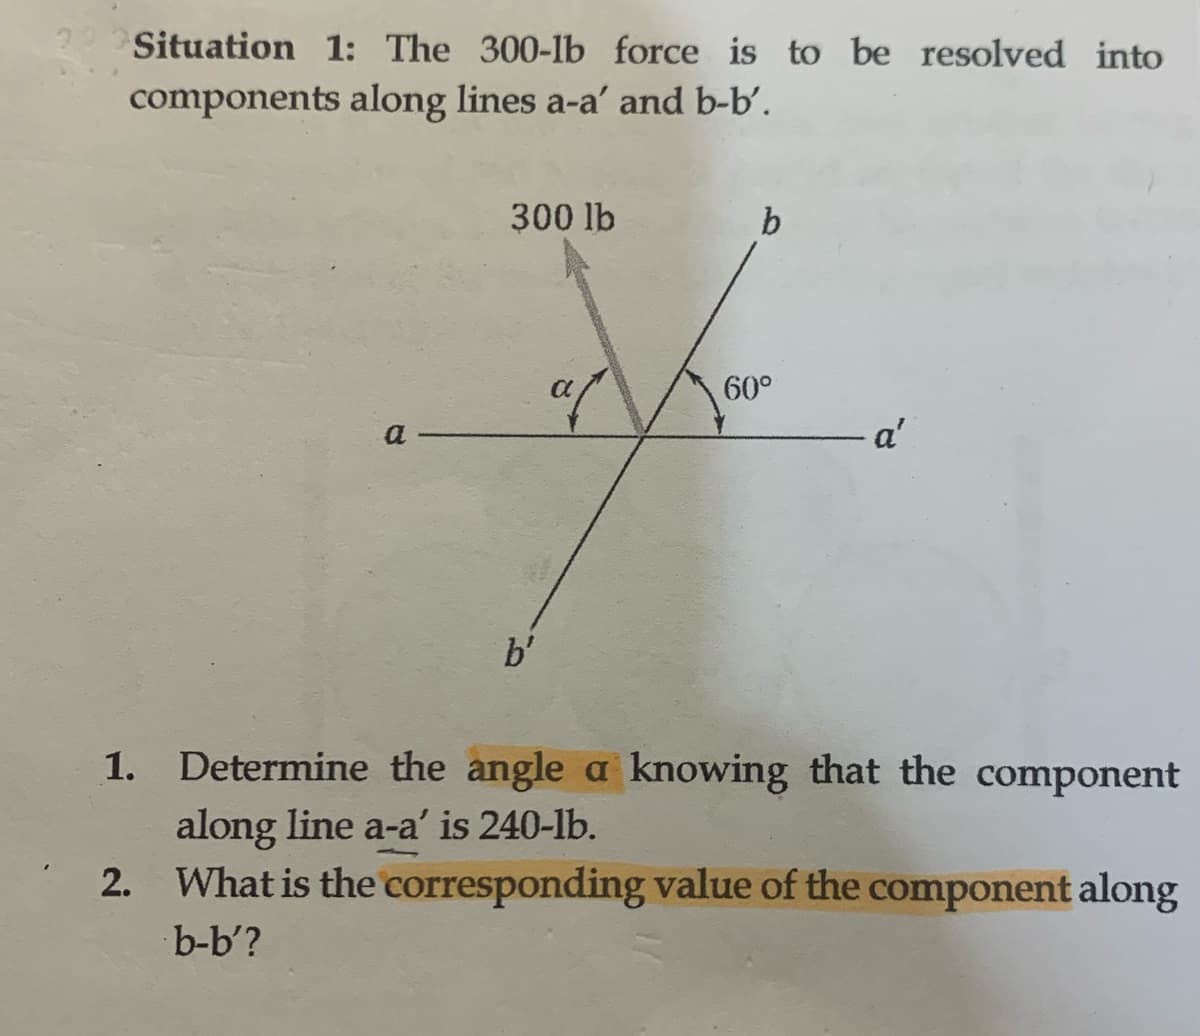 22 Situation 1: The 300-lb force is to be resolved into
components along lines a-a' and b-b'.
a
1.
300 lb
b'
af
b
60°
- a'
Determine the angle a knowing that the component
along line a-a' is 240-lb.
2. What is the corresponding value of the component along
b-b'?